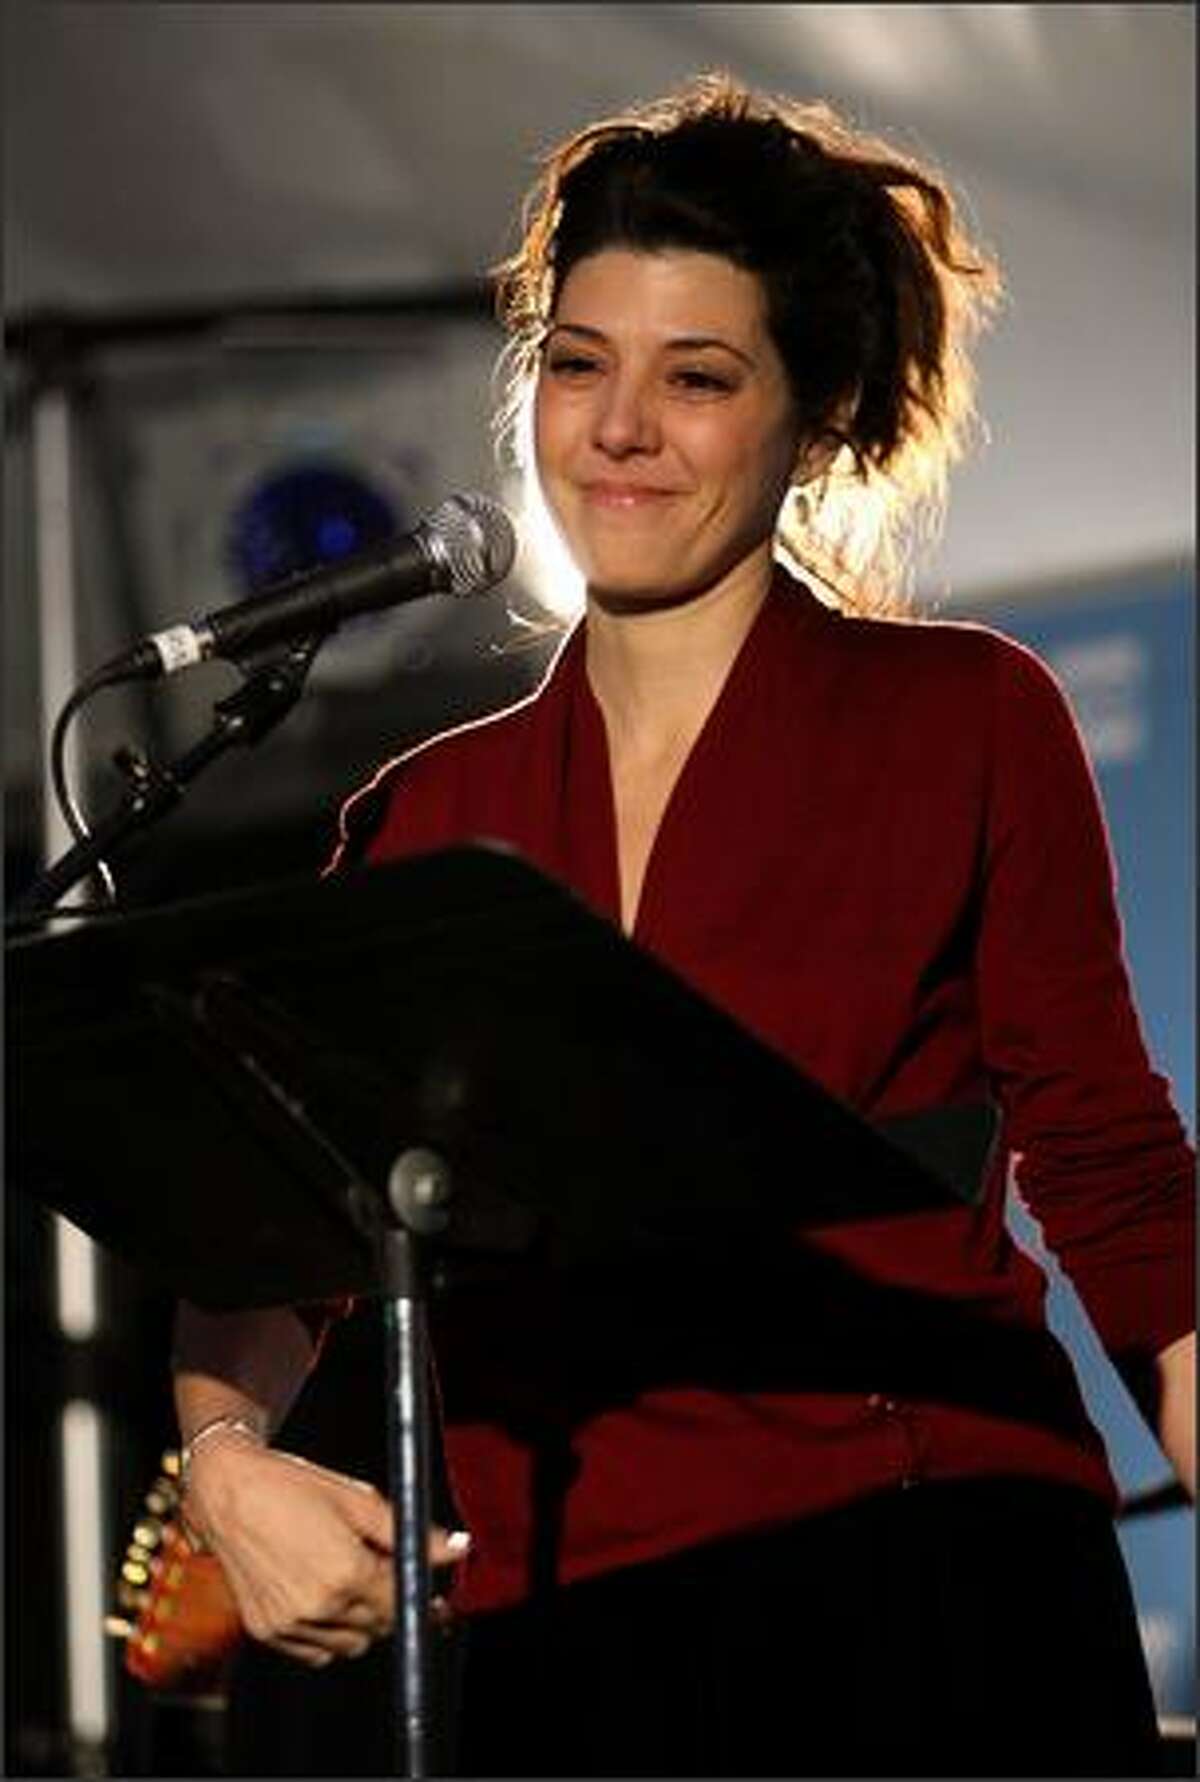 Actress Marisa Tomei speaks on stage at The People Speak ASCAP Music Cafe performance held during the 2009 Sundance Music Festival on Thursday in Park City, Utah.